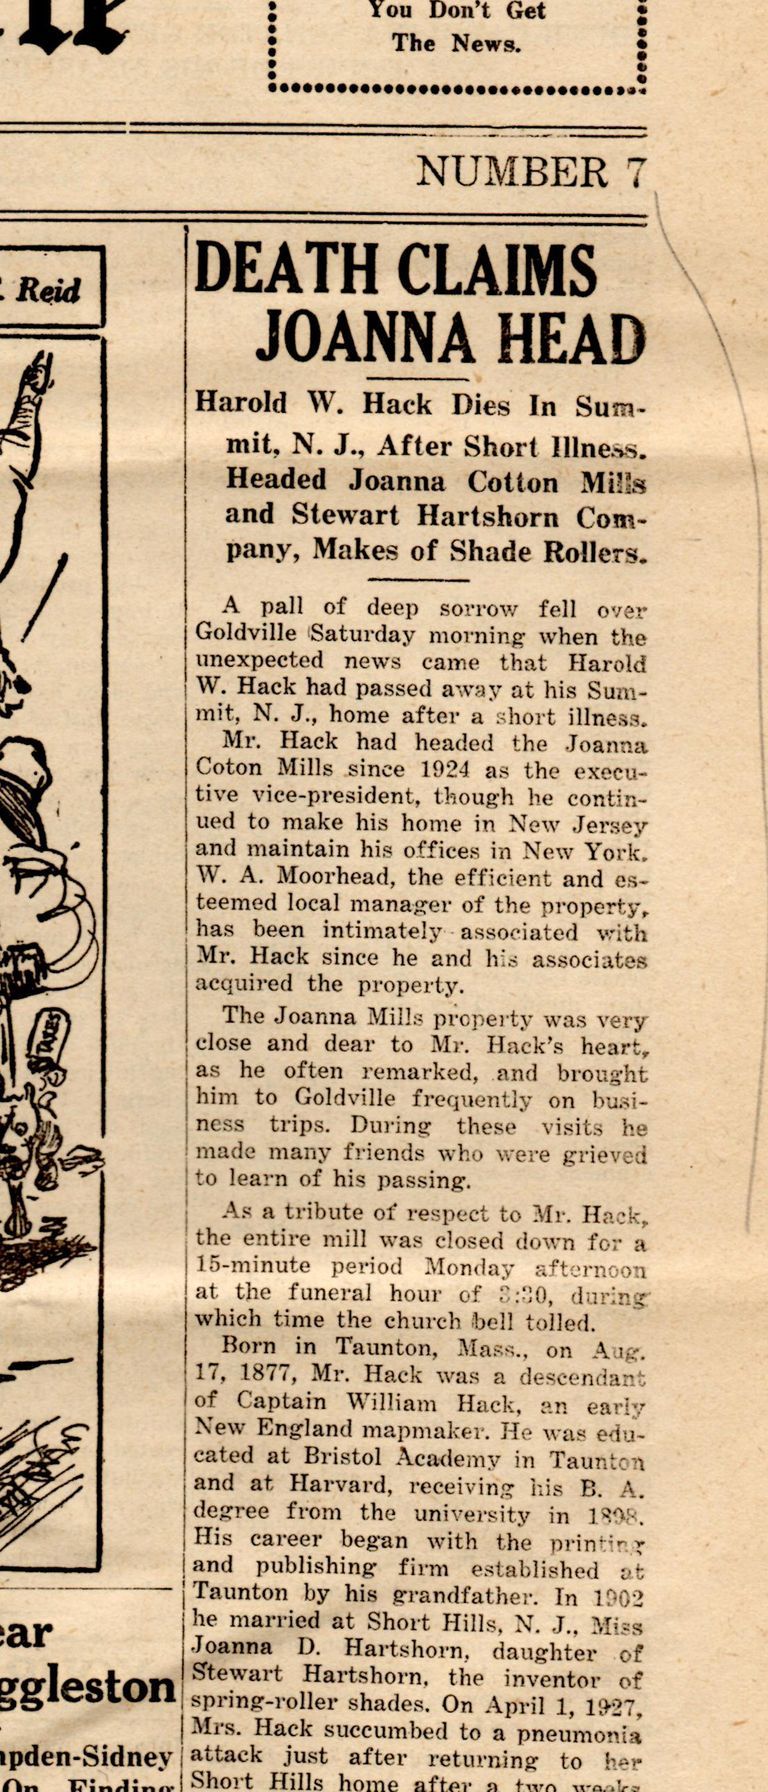          Hack: Harold Hack Obituary Clinton Chronicle, 1933 picture number 1
   